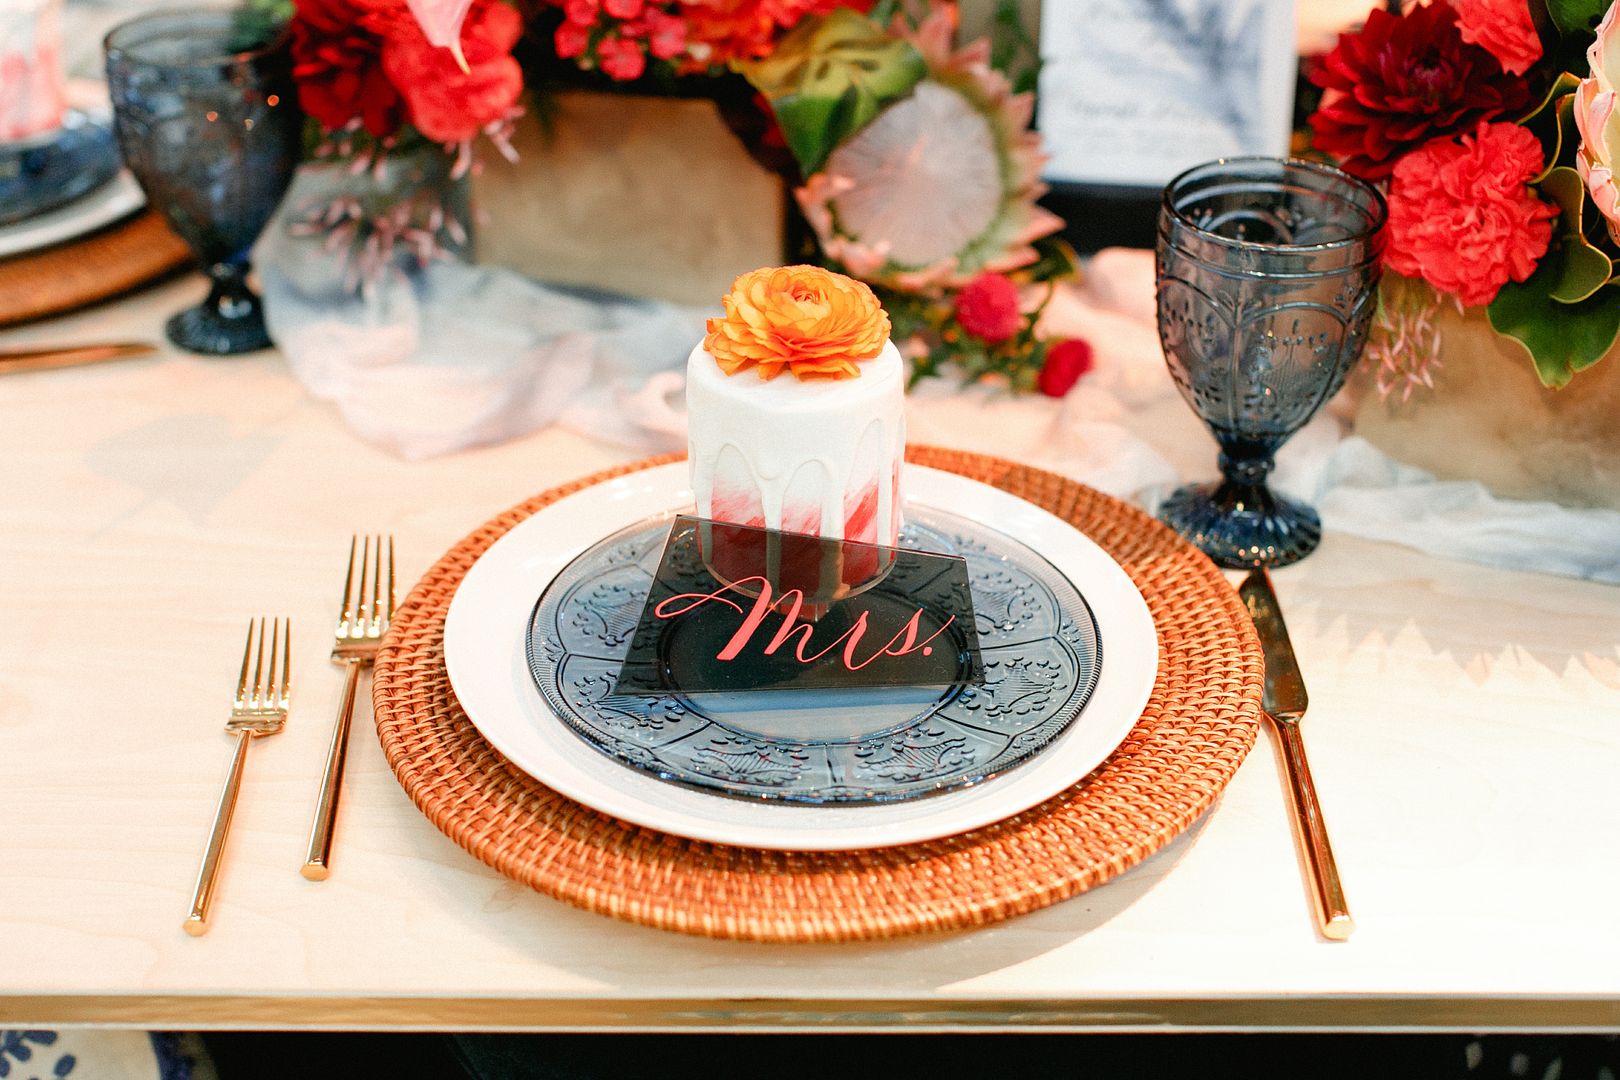  FRESHbash Event with Boho Design Ideas from Team Wild Love, design by Petite Pomme, cake designs by Sevacha, florals by Botanica Lifestyle + Design, Milou & Olin Photography